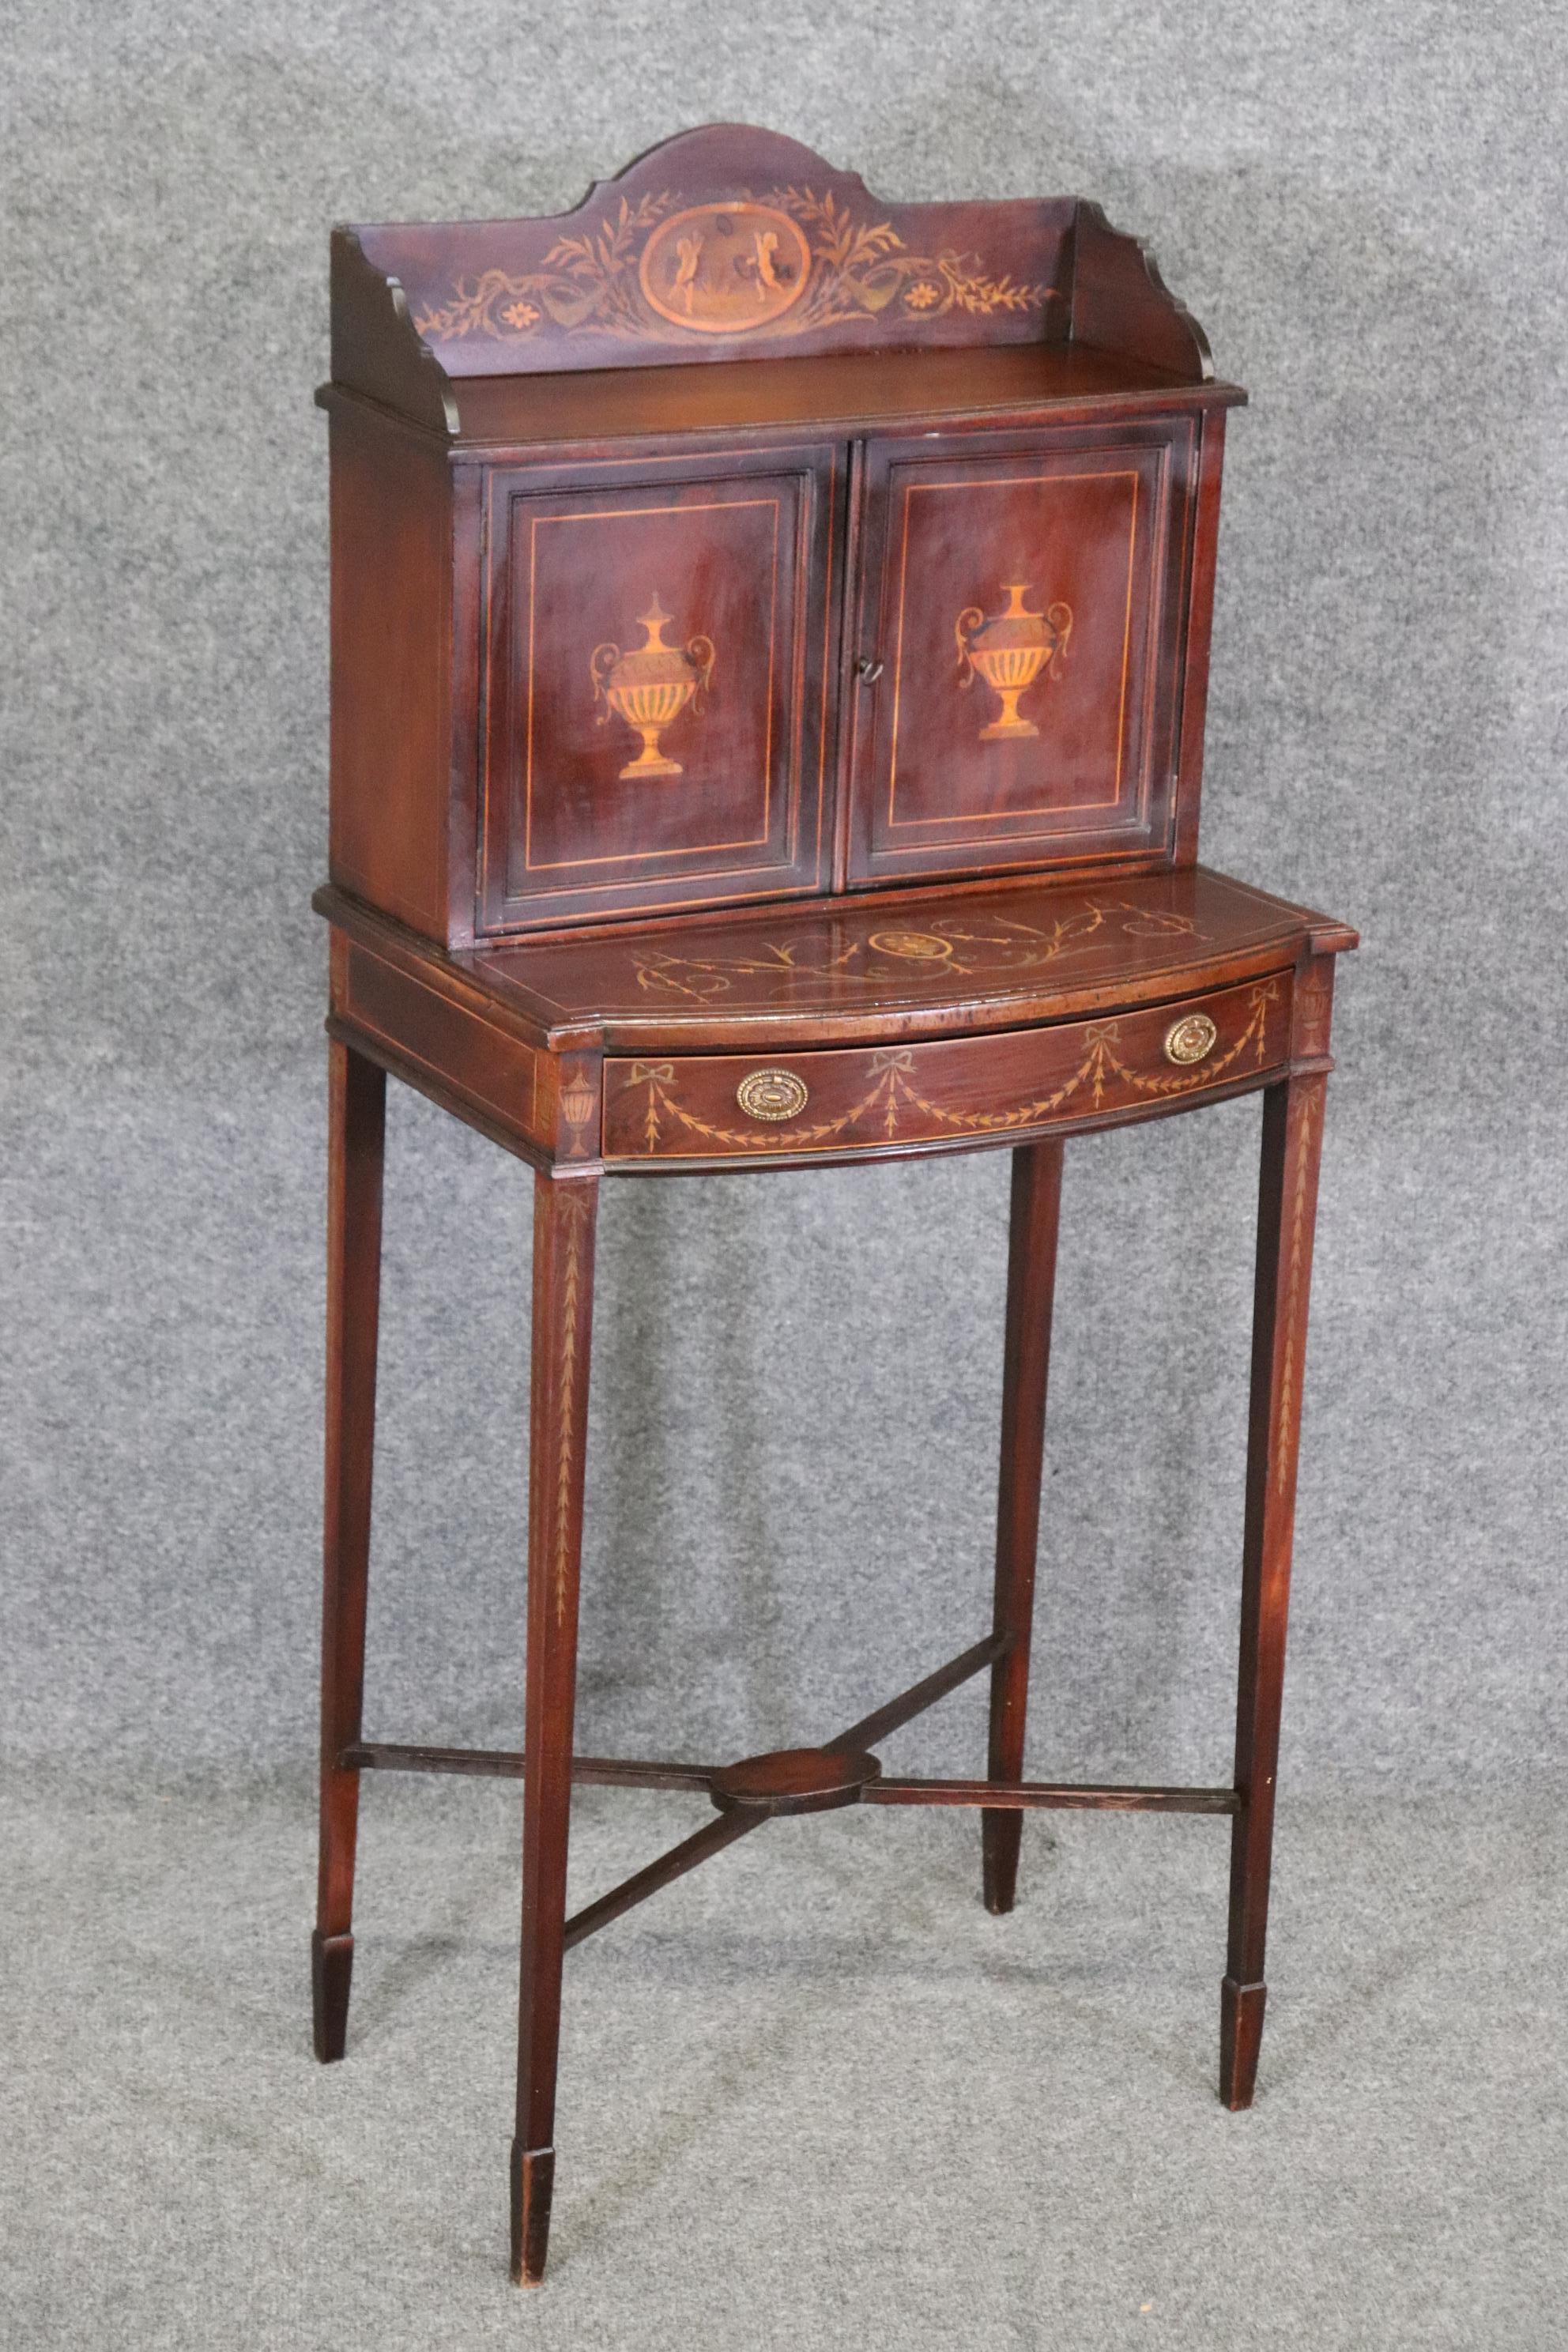 This is a fantastic and small apartment size 1900s era Edwardian secretary. The desk is extremely small, and perfect for a hallway or small space in a tiny area. Think of an apartment in Manhattan, which this would be perfect for. The desk is in its